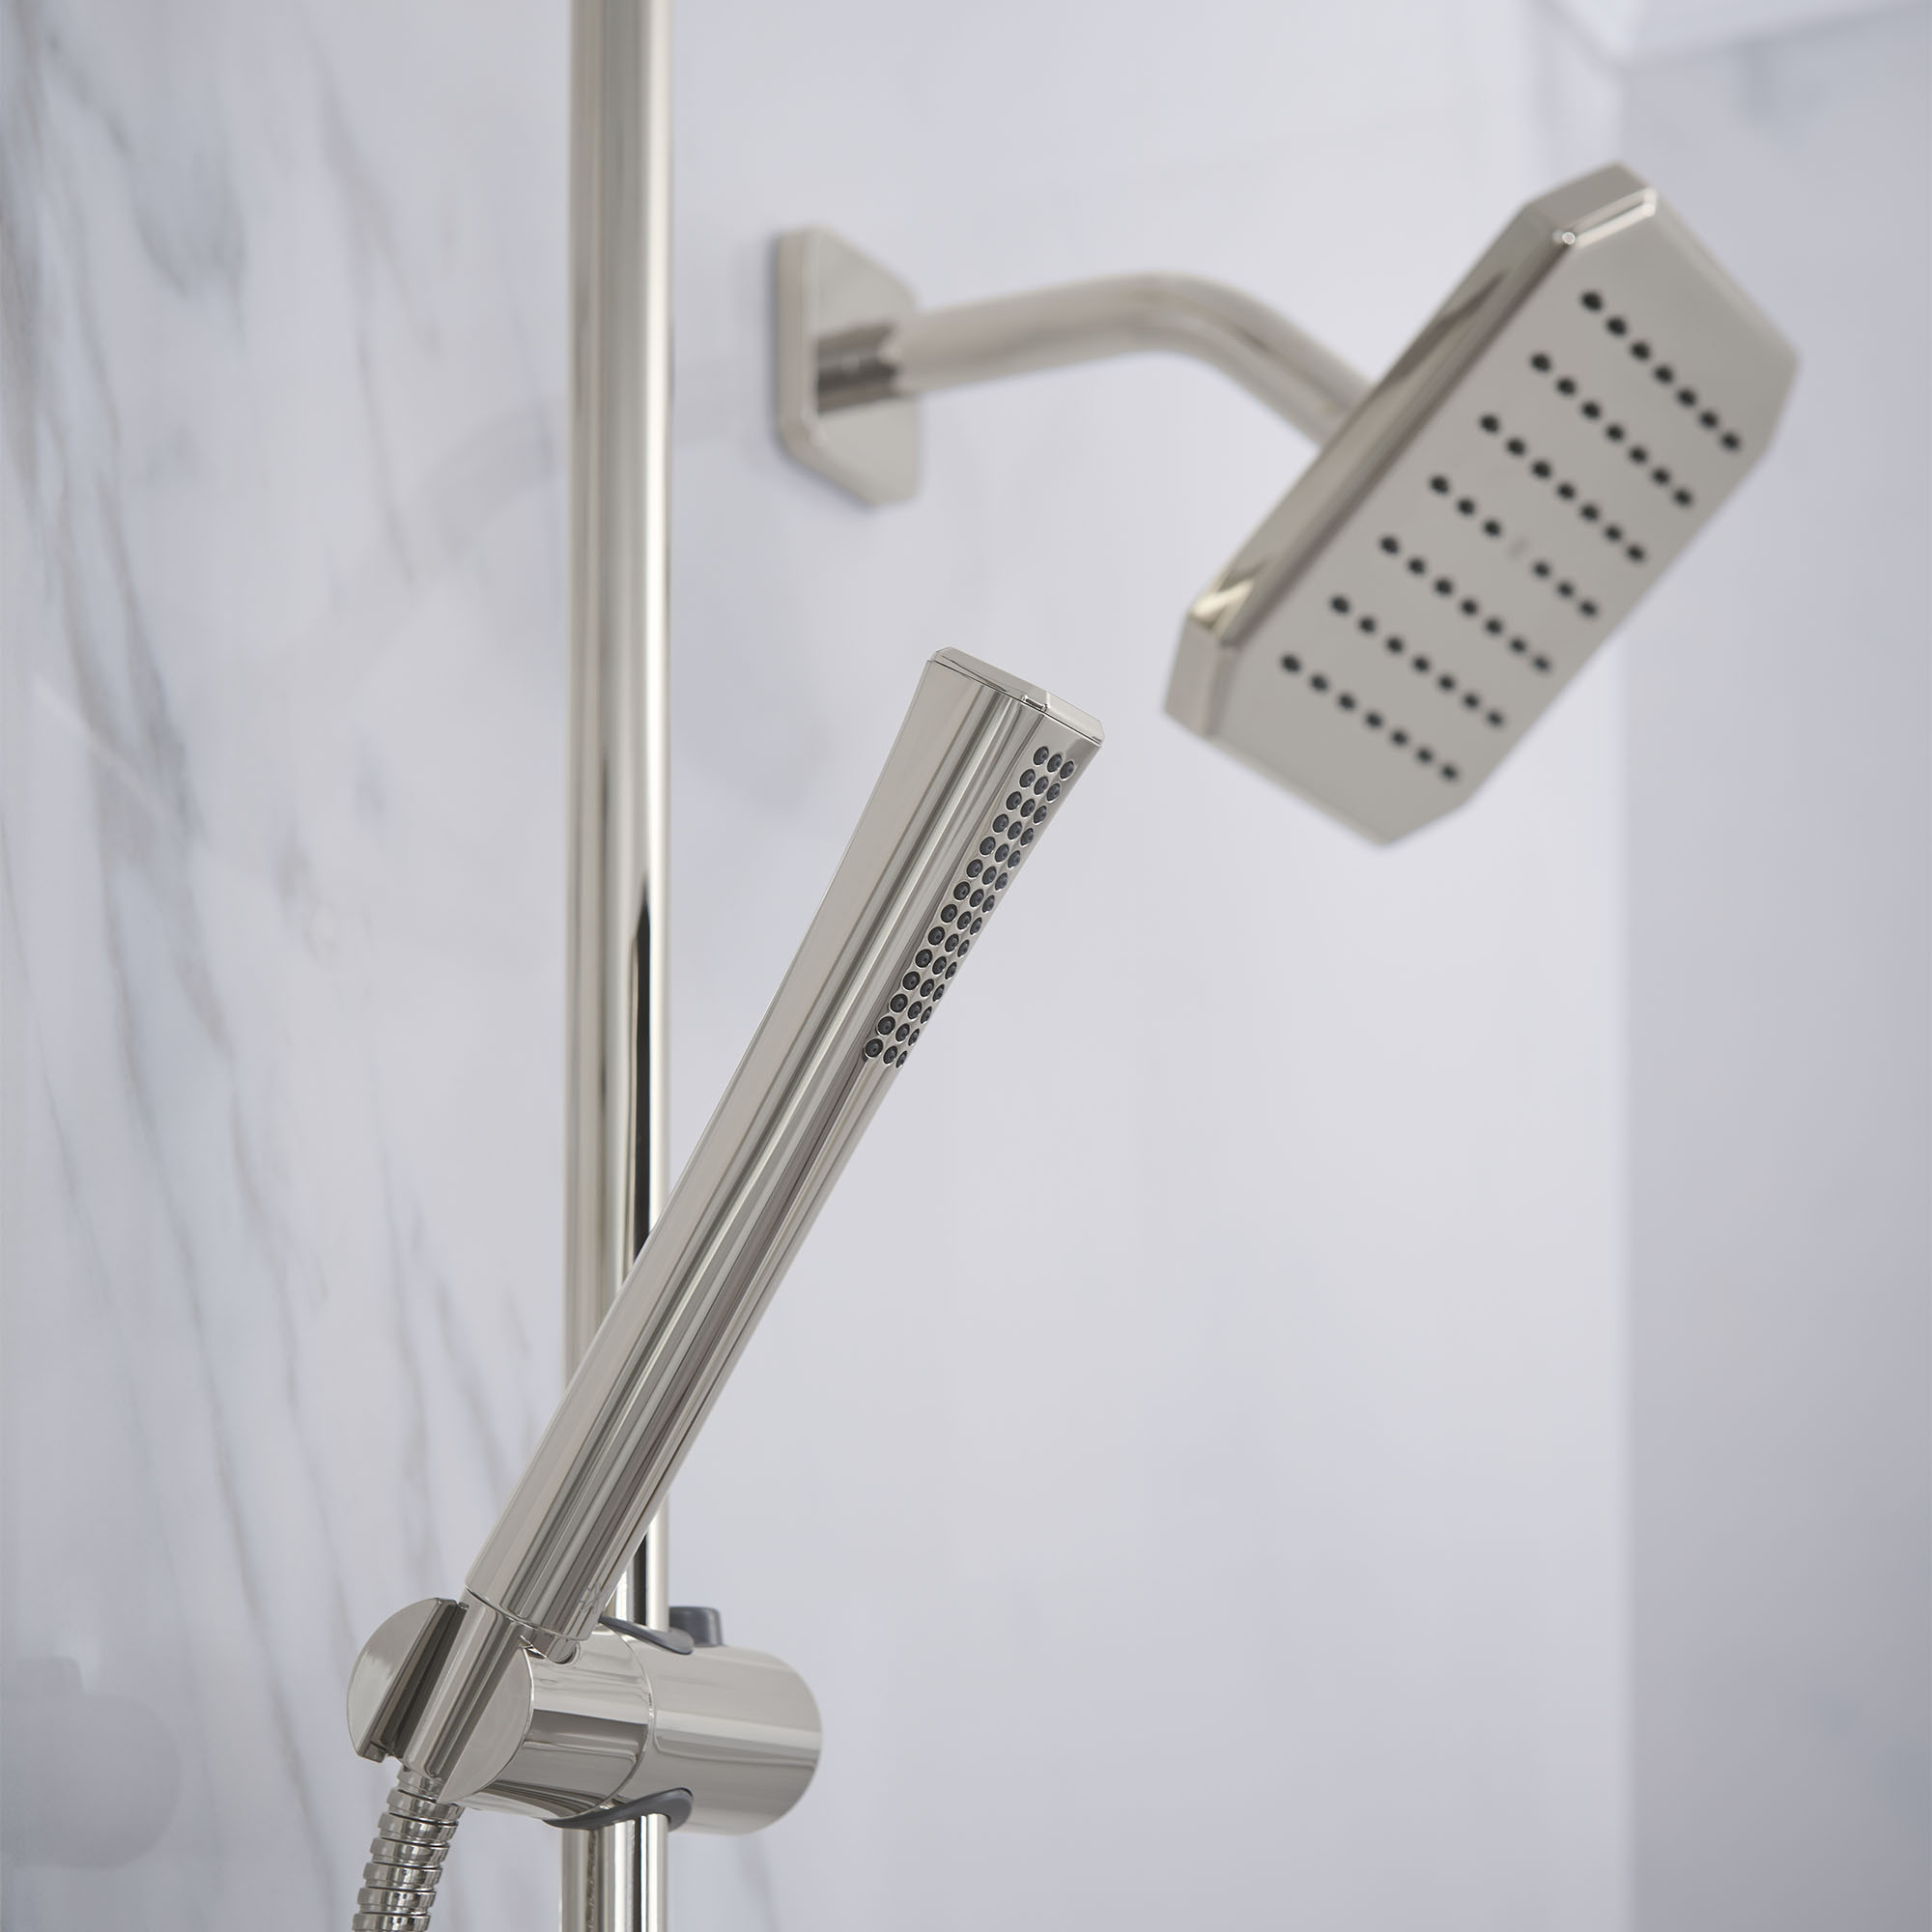 Belshire™ 2-Handle Thermostatic Valve Trim Only with Lever Handles